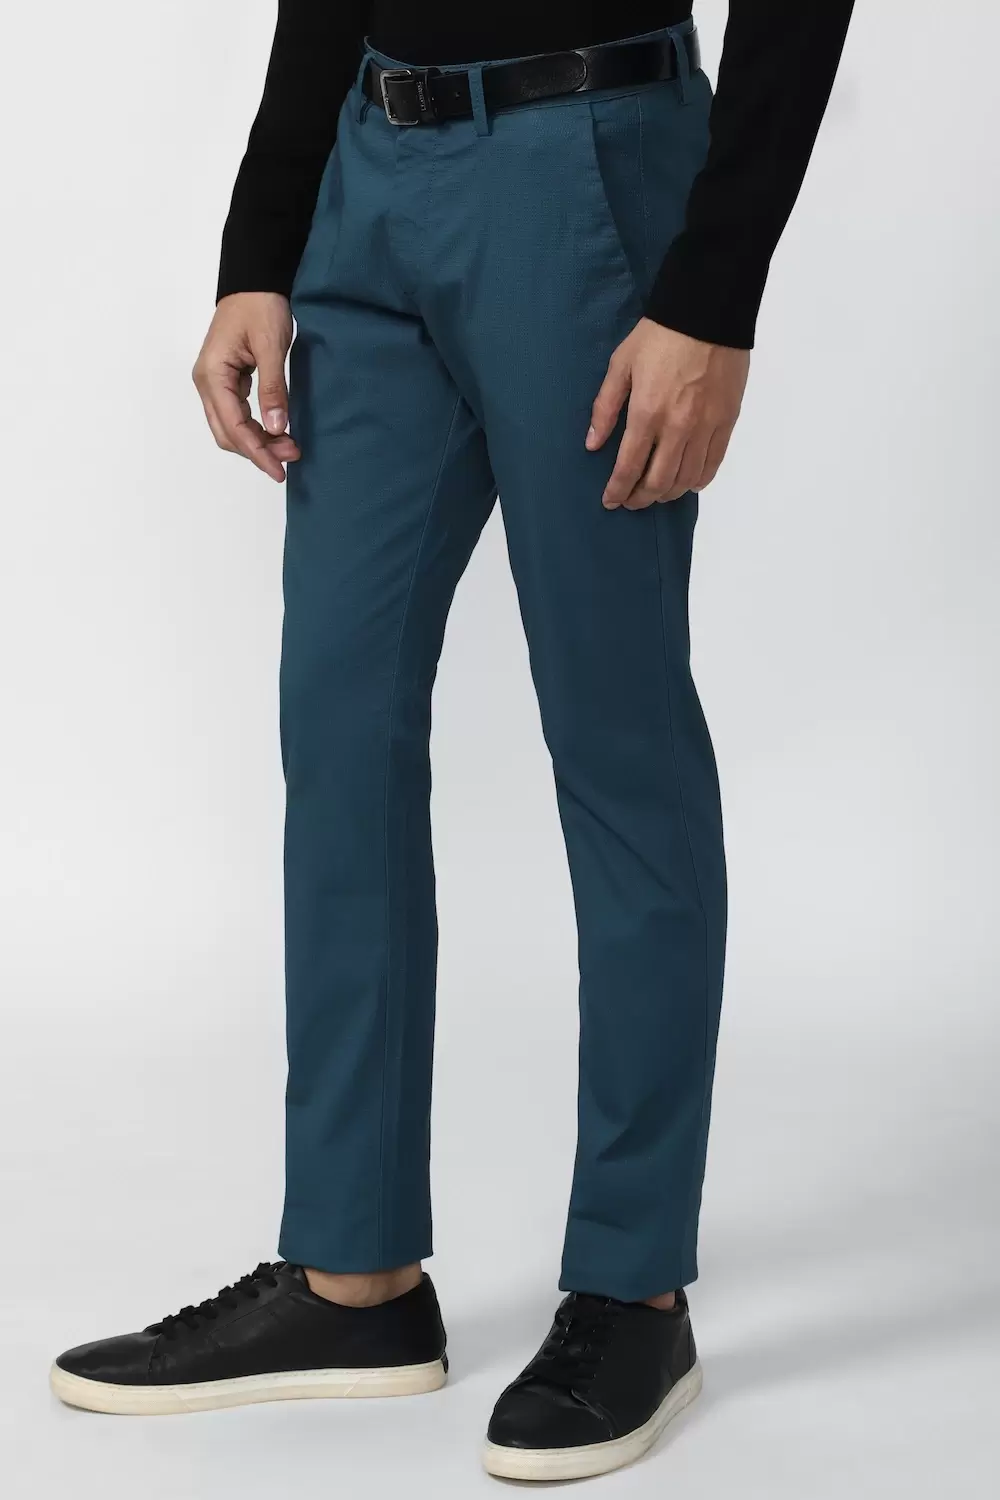 Buy Men Beige Solid Carrot Fit Casual Trousers Online - 685362 | Peter  England